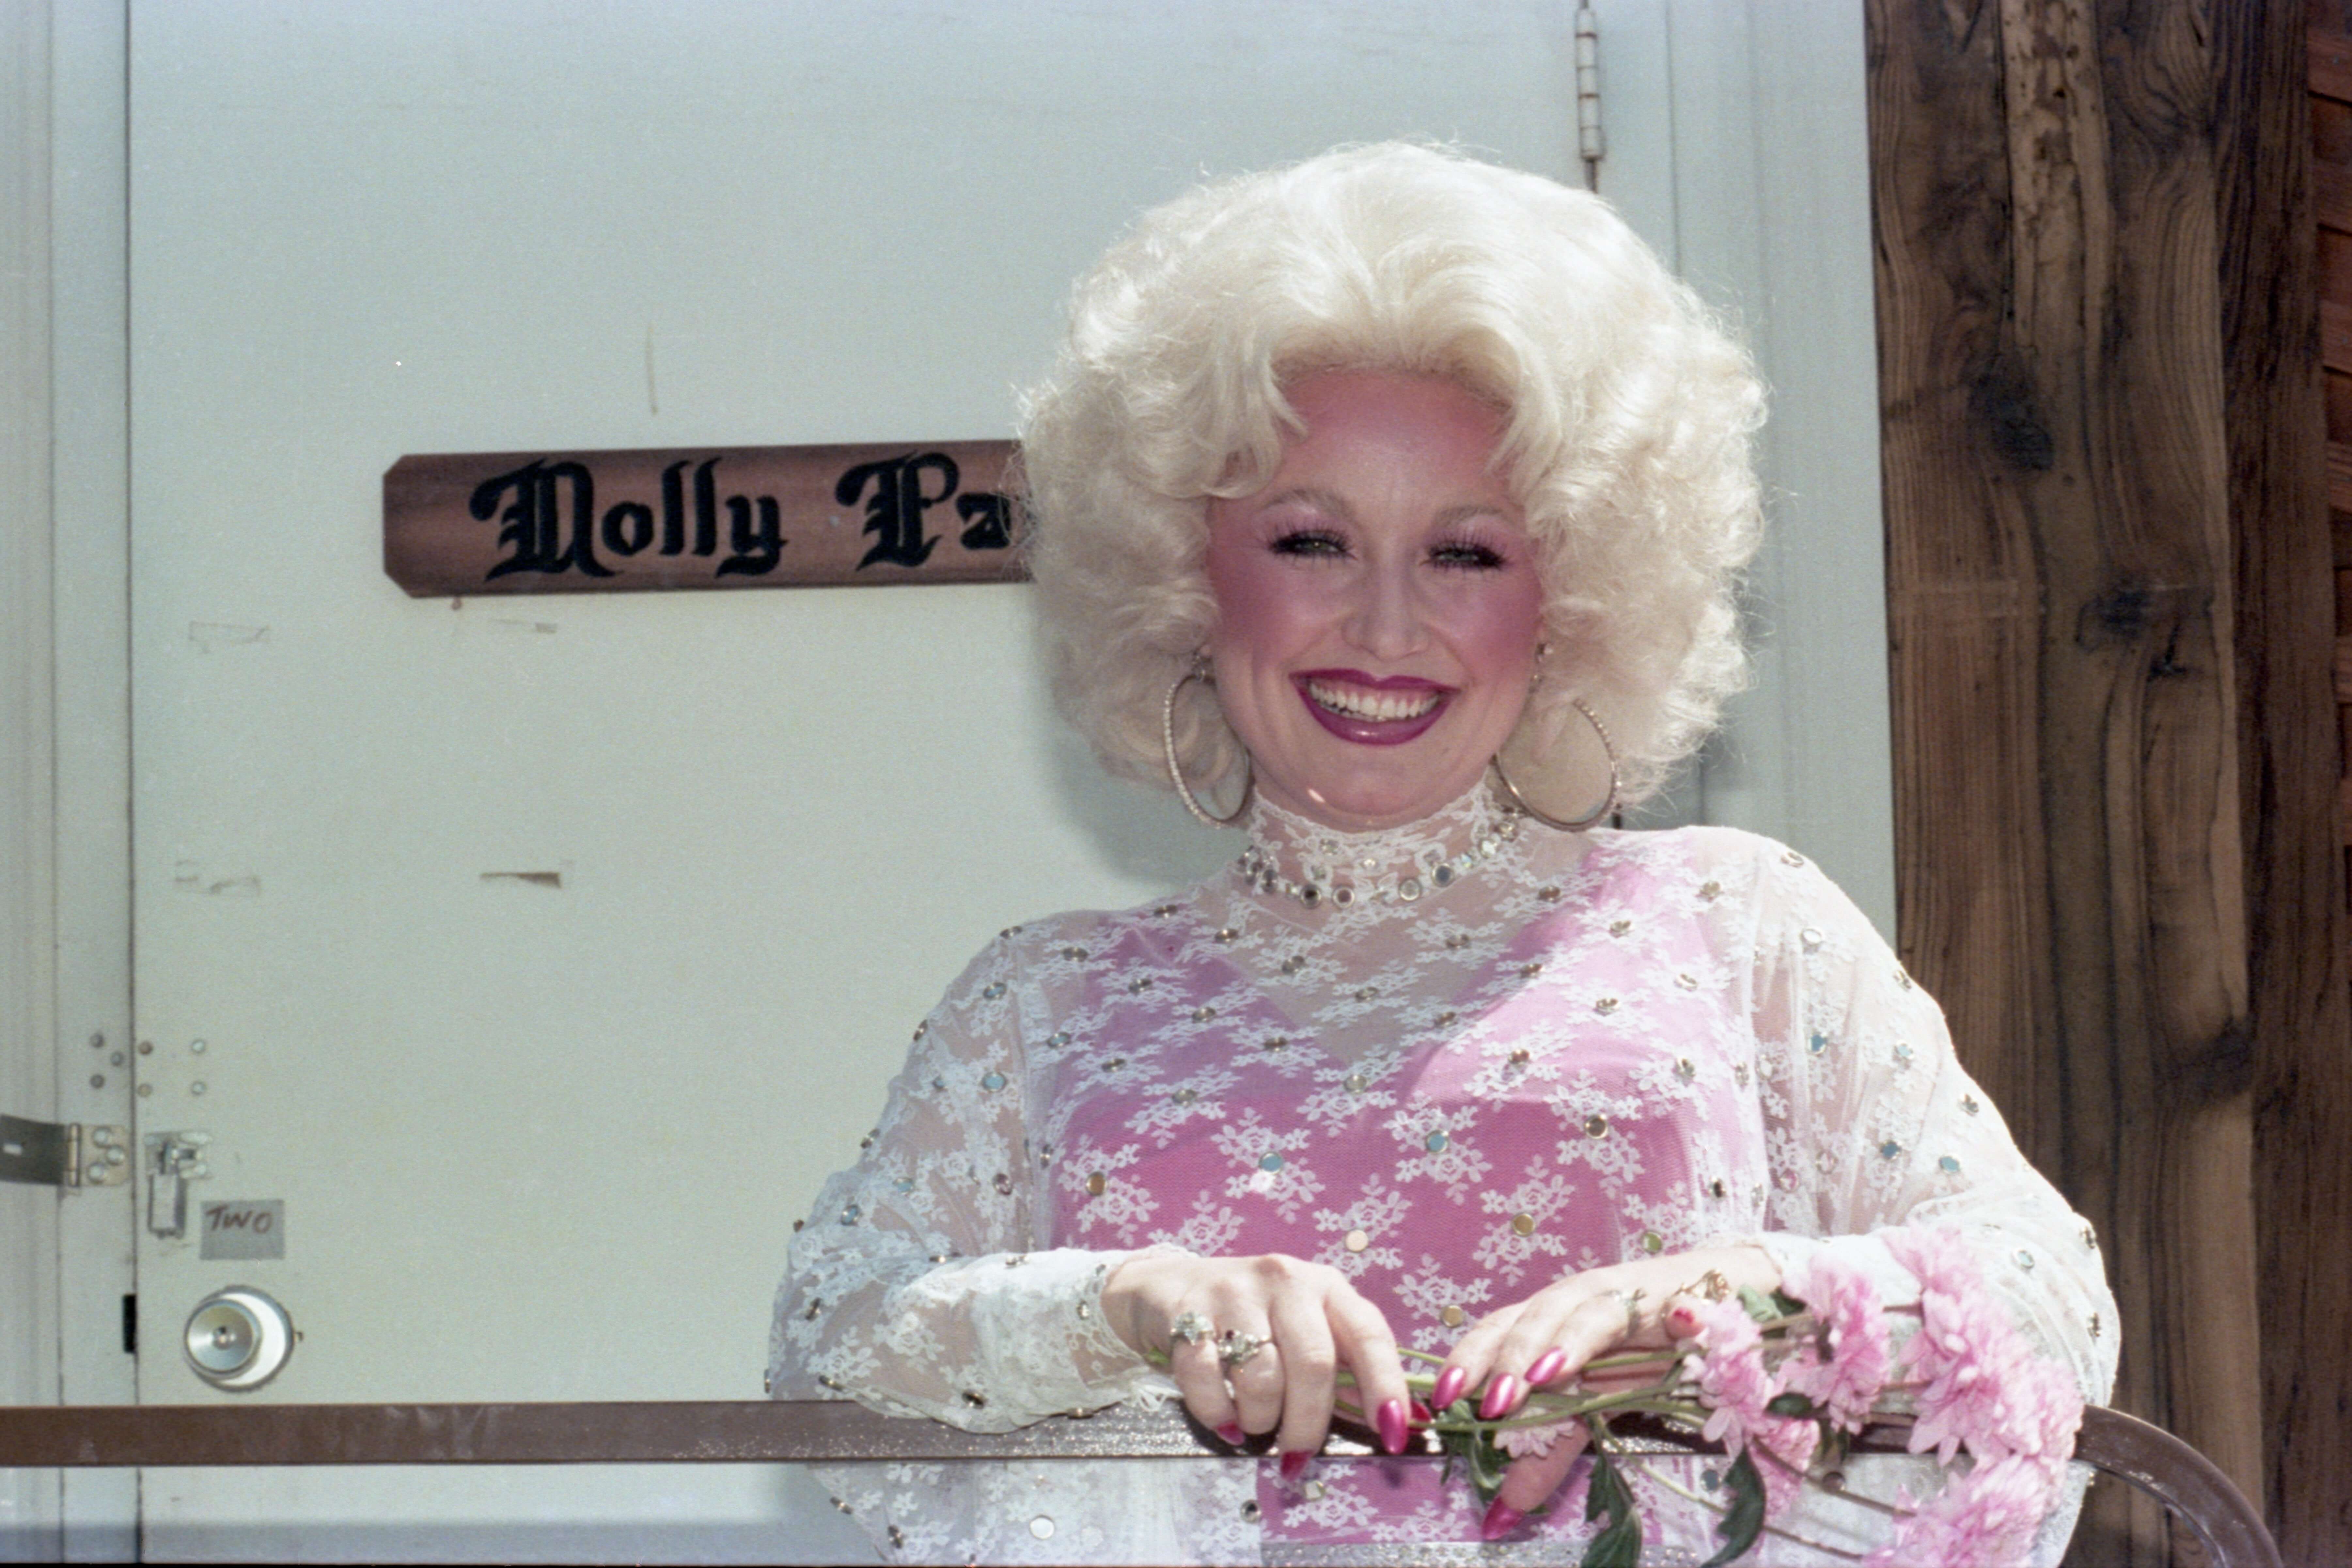 Dolly Parton in a white and pink dress.